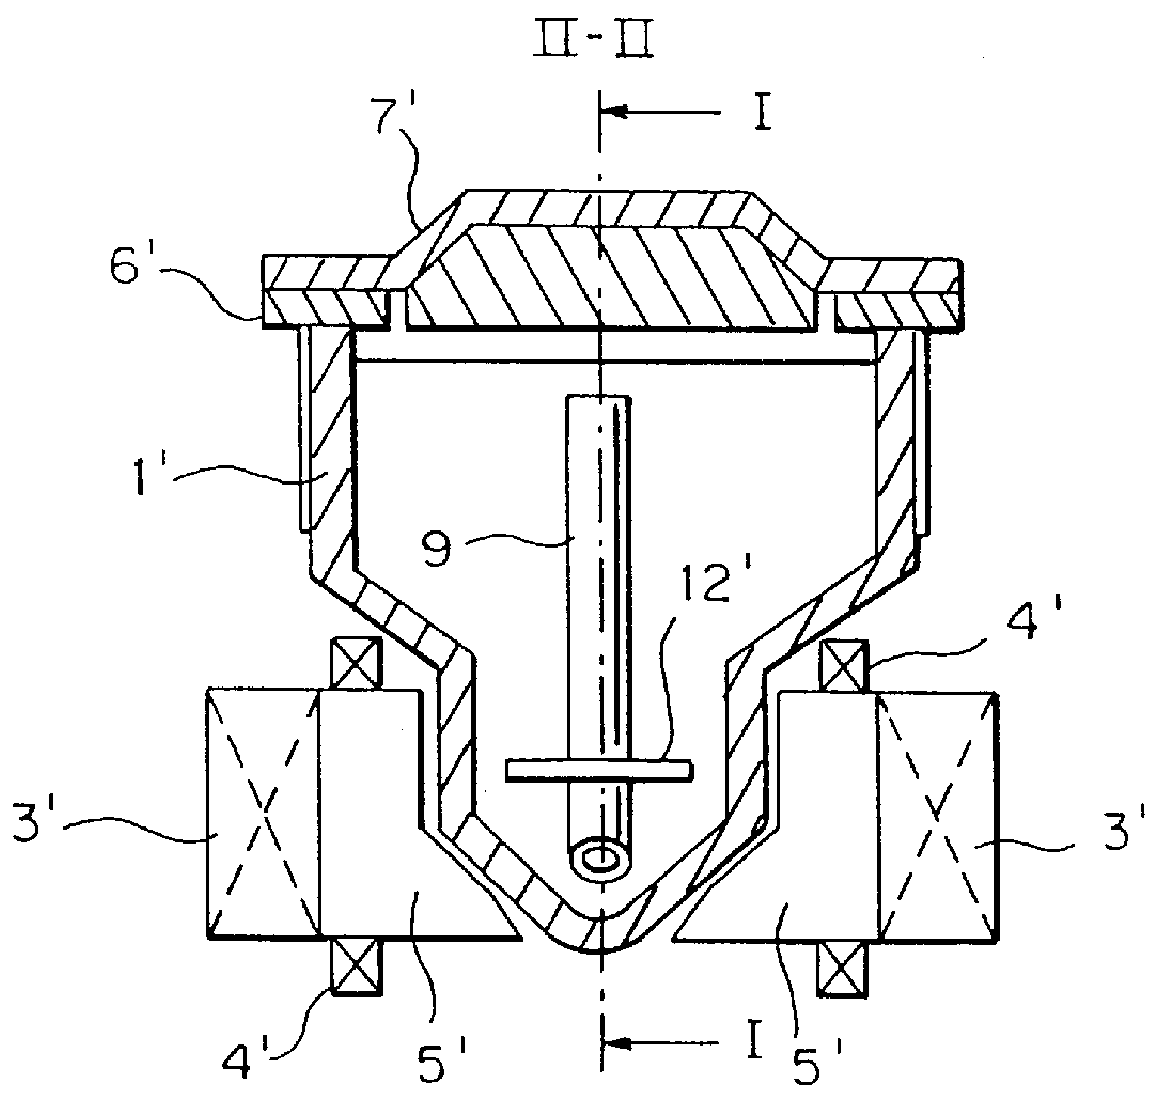 Apparatus for the process of melting and purification of aluminum, copper, brass, lead and bronze alloys